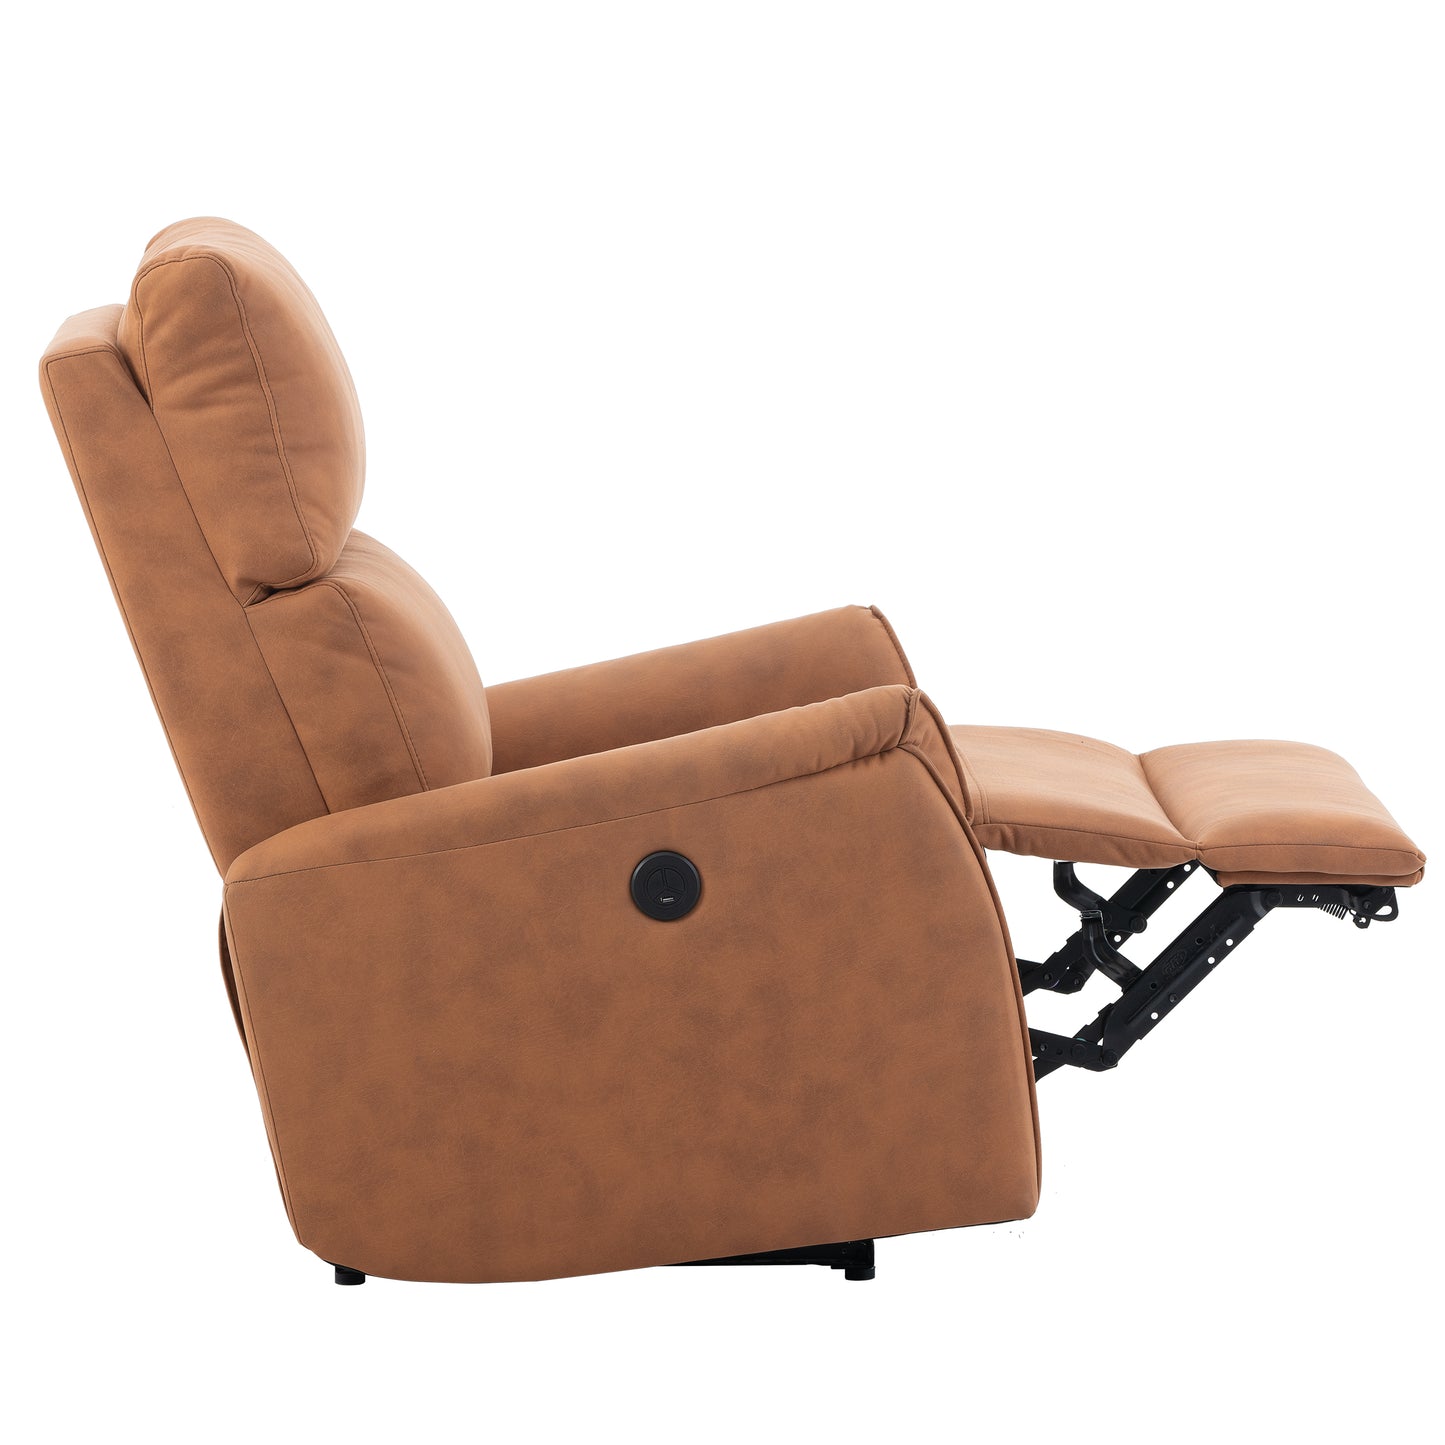 CompactLux Streamline: Space-Saver Power Recliner with USB